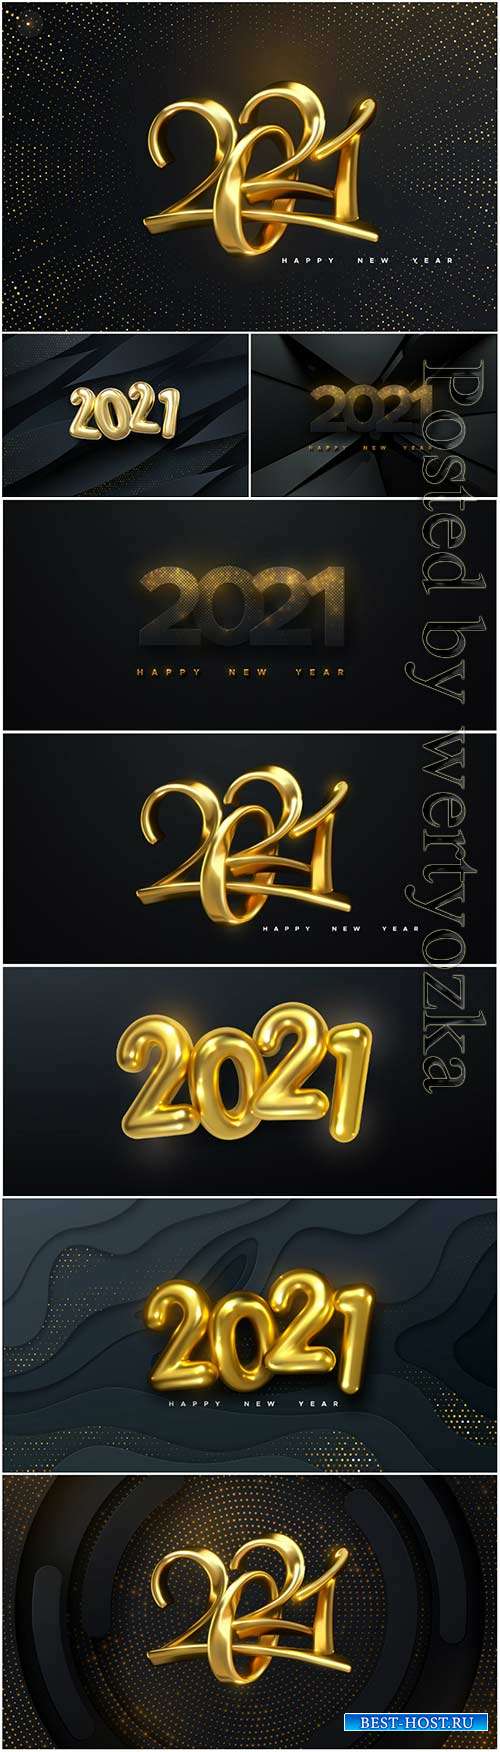 Happy new year background with realistic gold numbers 2021